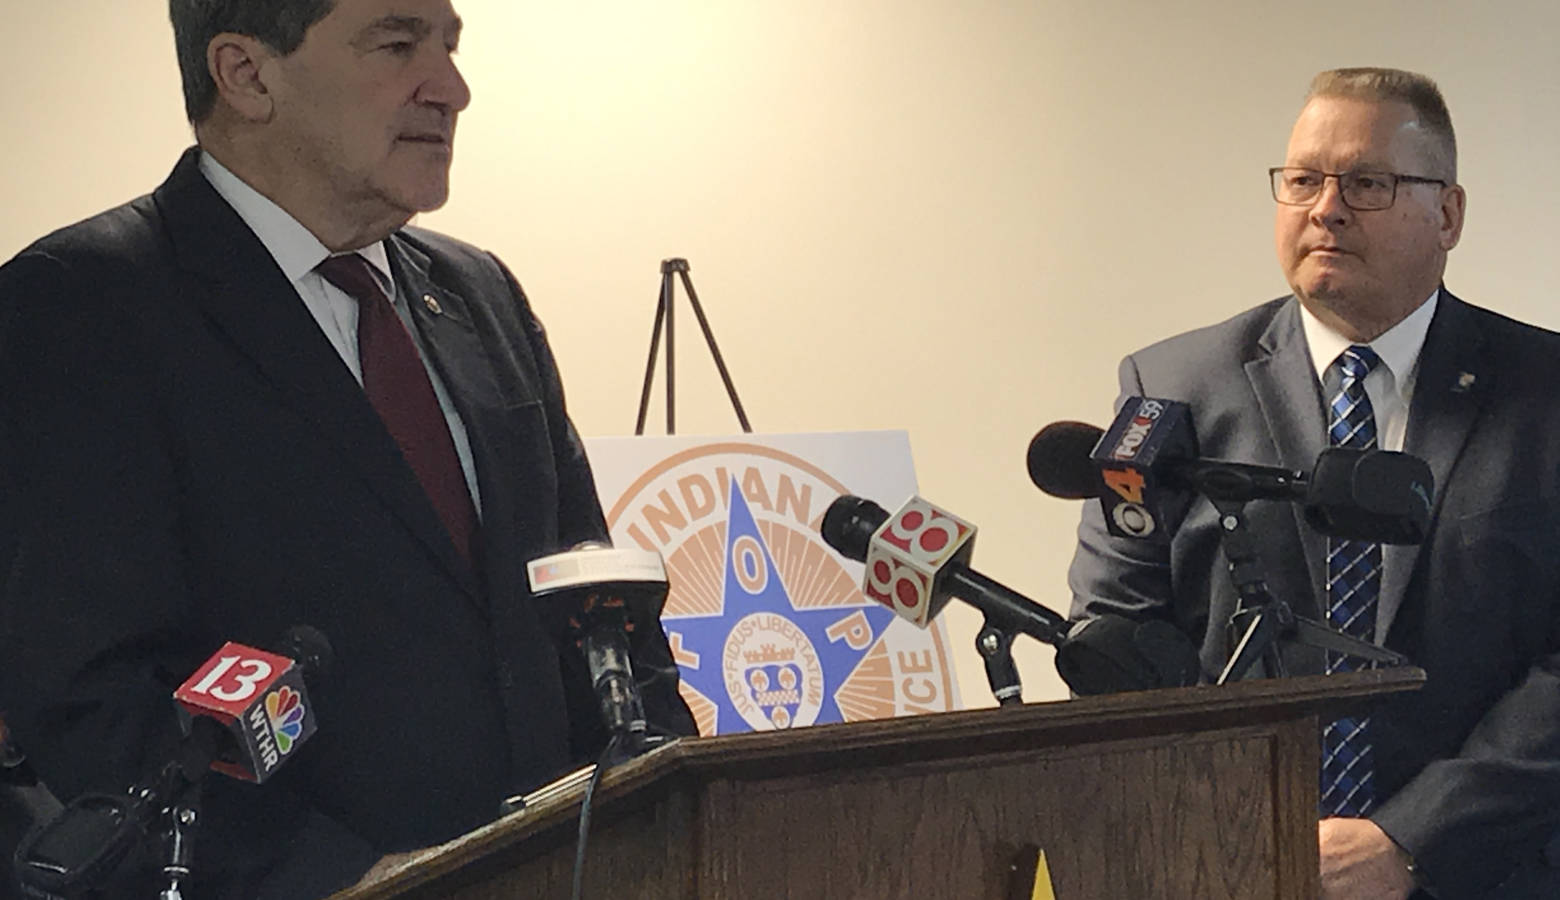 Sen. Joe Donnelly (D-Ind.), left, receives an endorsement from the Indiana Fraternal Order of Police and its president Bill Owensby, right. (Brandon Smith/IPB News)